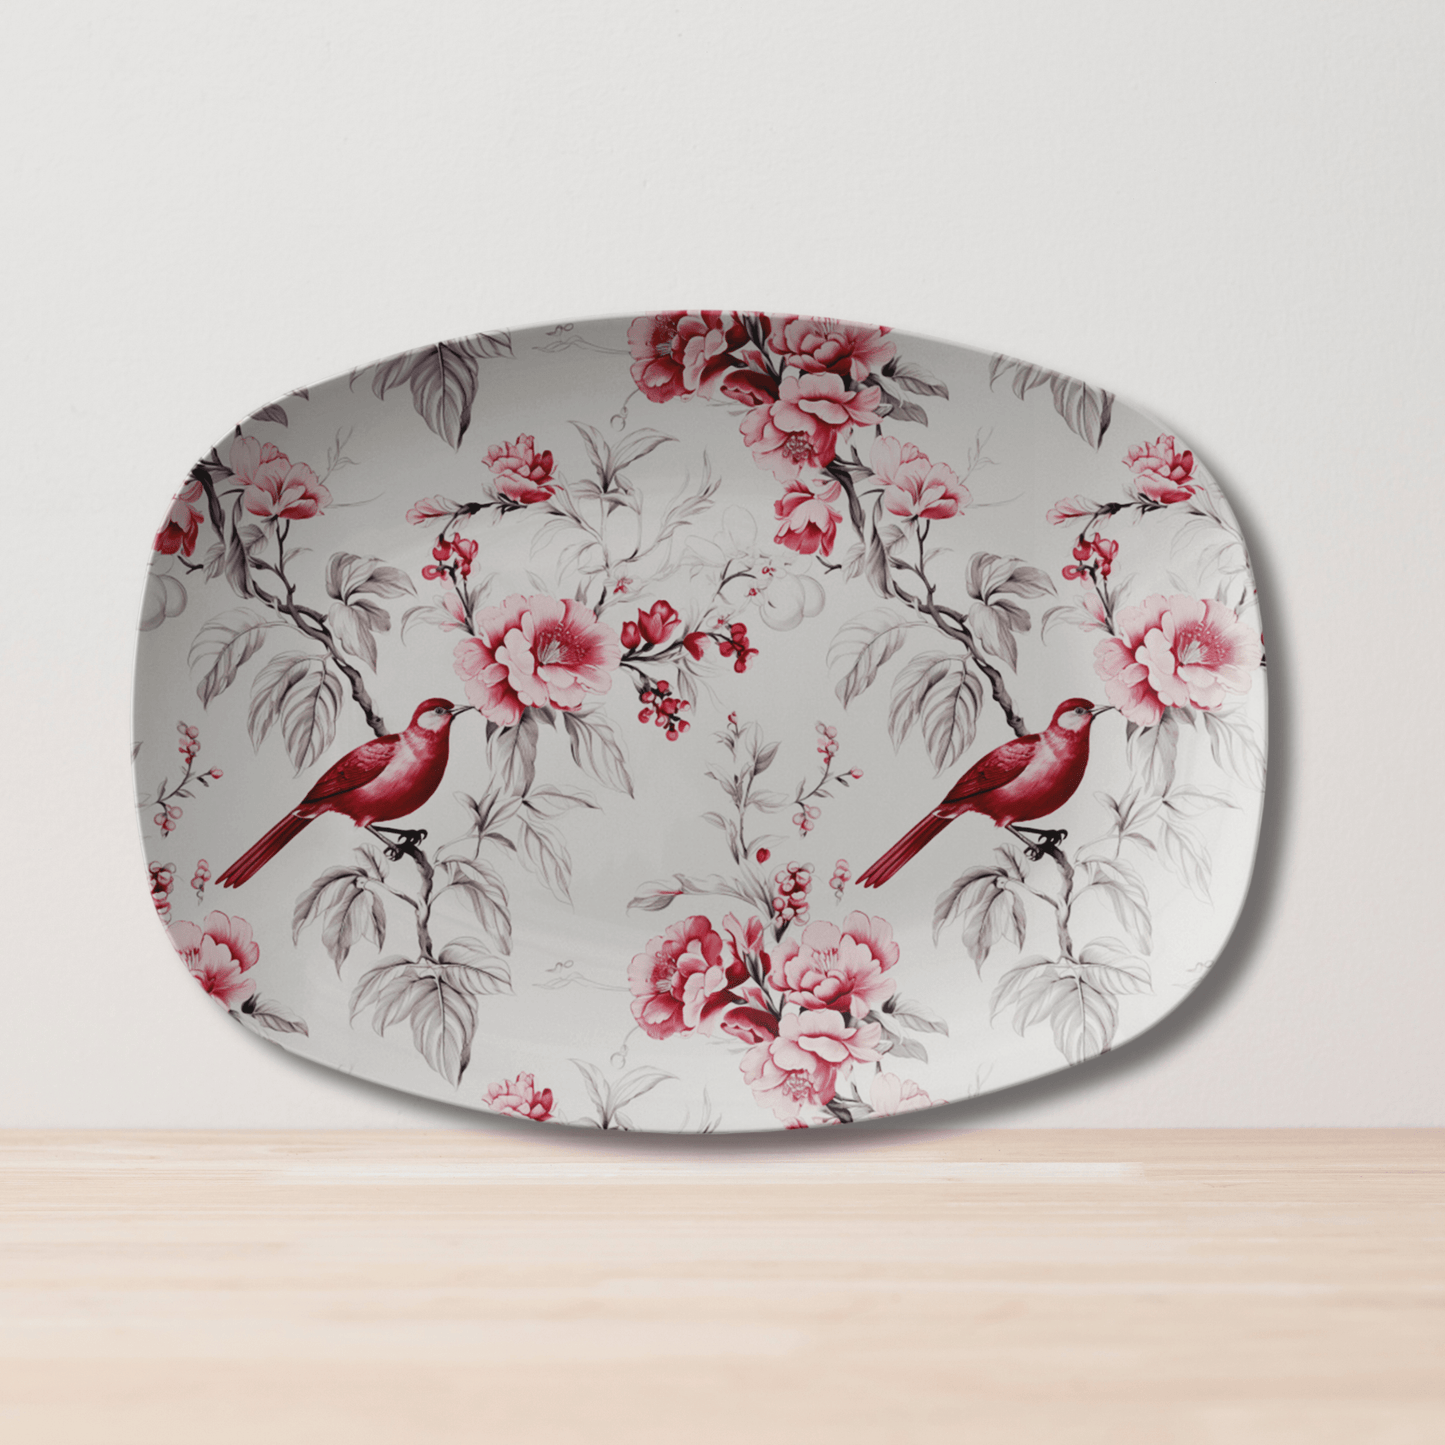 teelaunch CHINOISERIE BOTANICAL TOILE FLORAL CRANBERRY RED AND WHITE SERVING PLATTER.  - 133682923 Kitchenware 9727